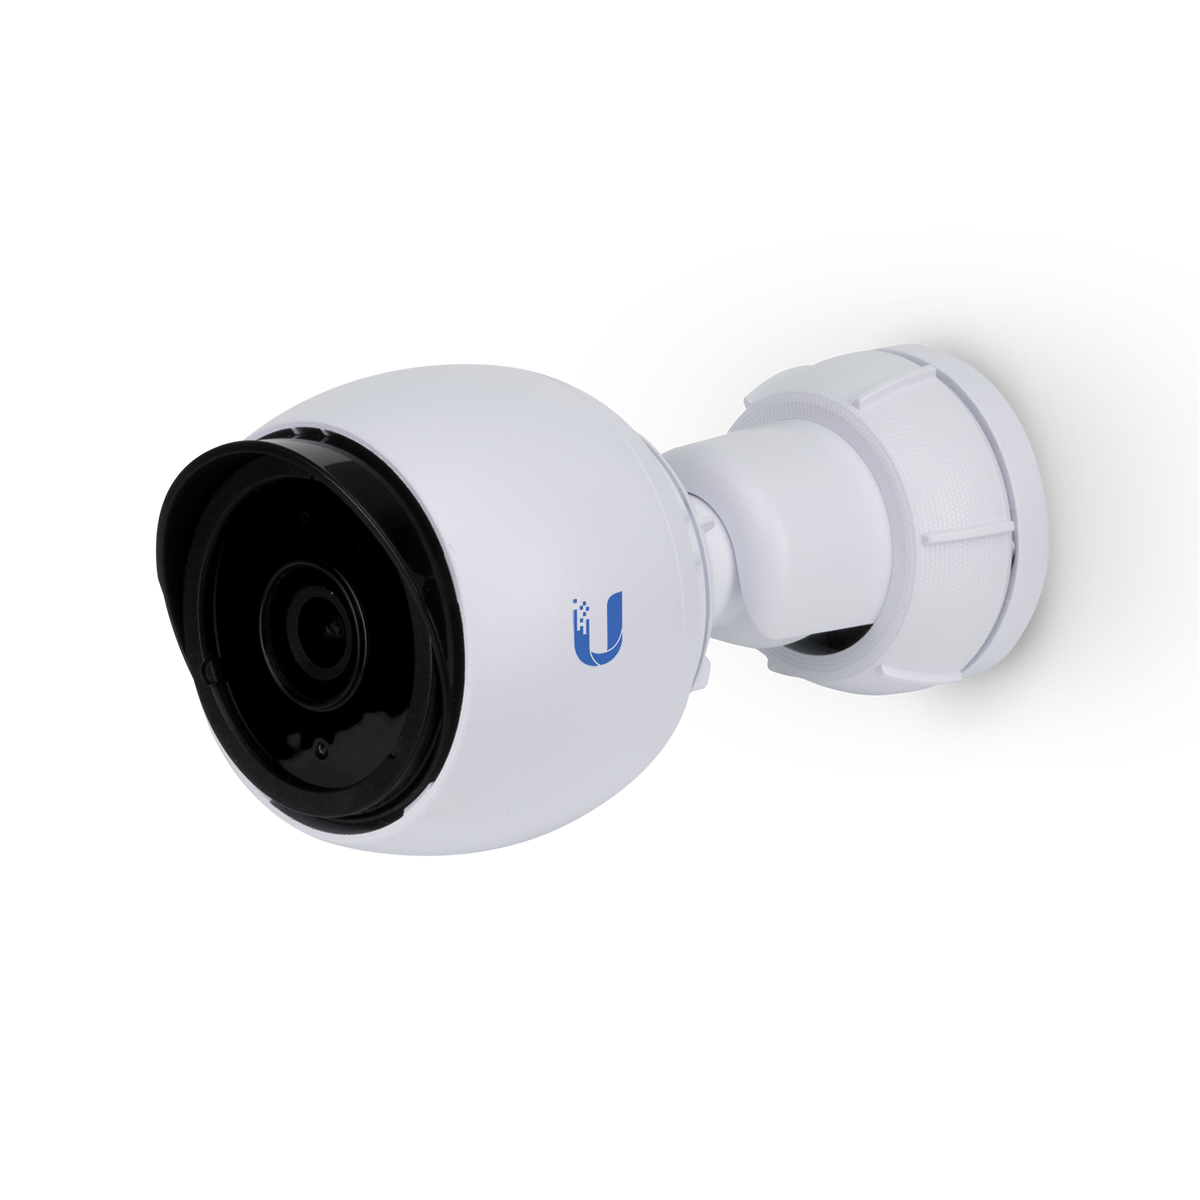 Ubiquiti Networks UniFi G4 Series 4MP Outdoor Bullet Camera